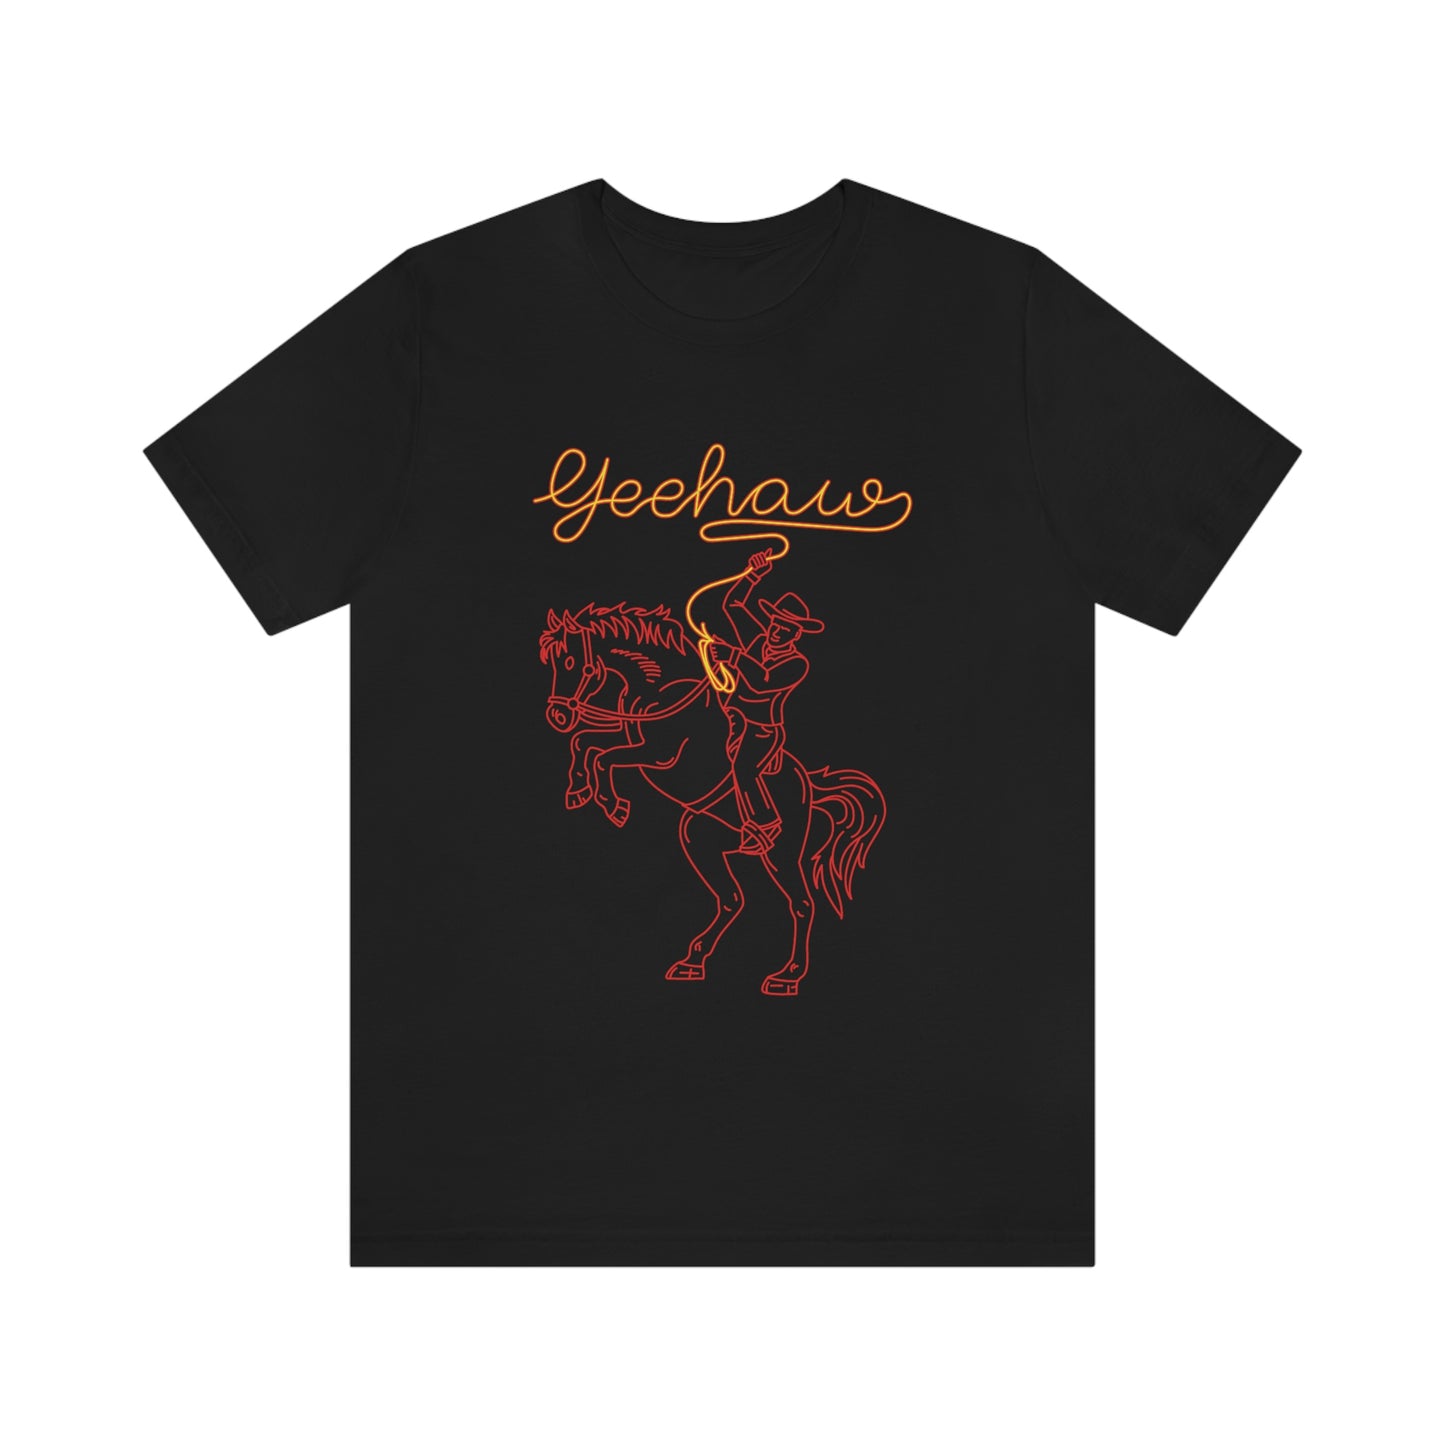 Black T-Shirt featuring a neon design of a cowboy with a lasso saying 'yeehaw' in yellow and red, from the TEQNEON Word Craft collection